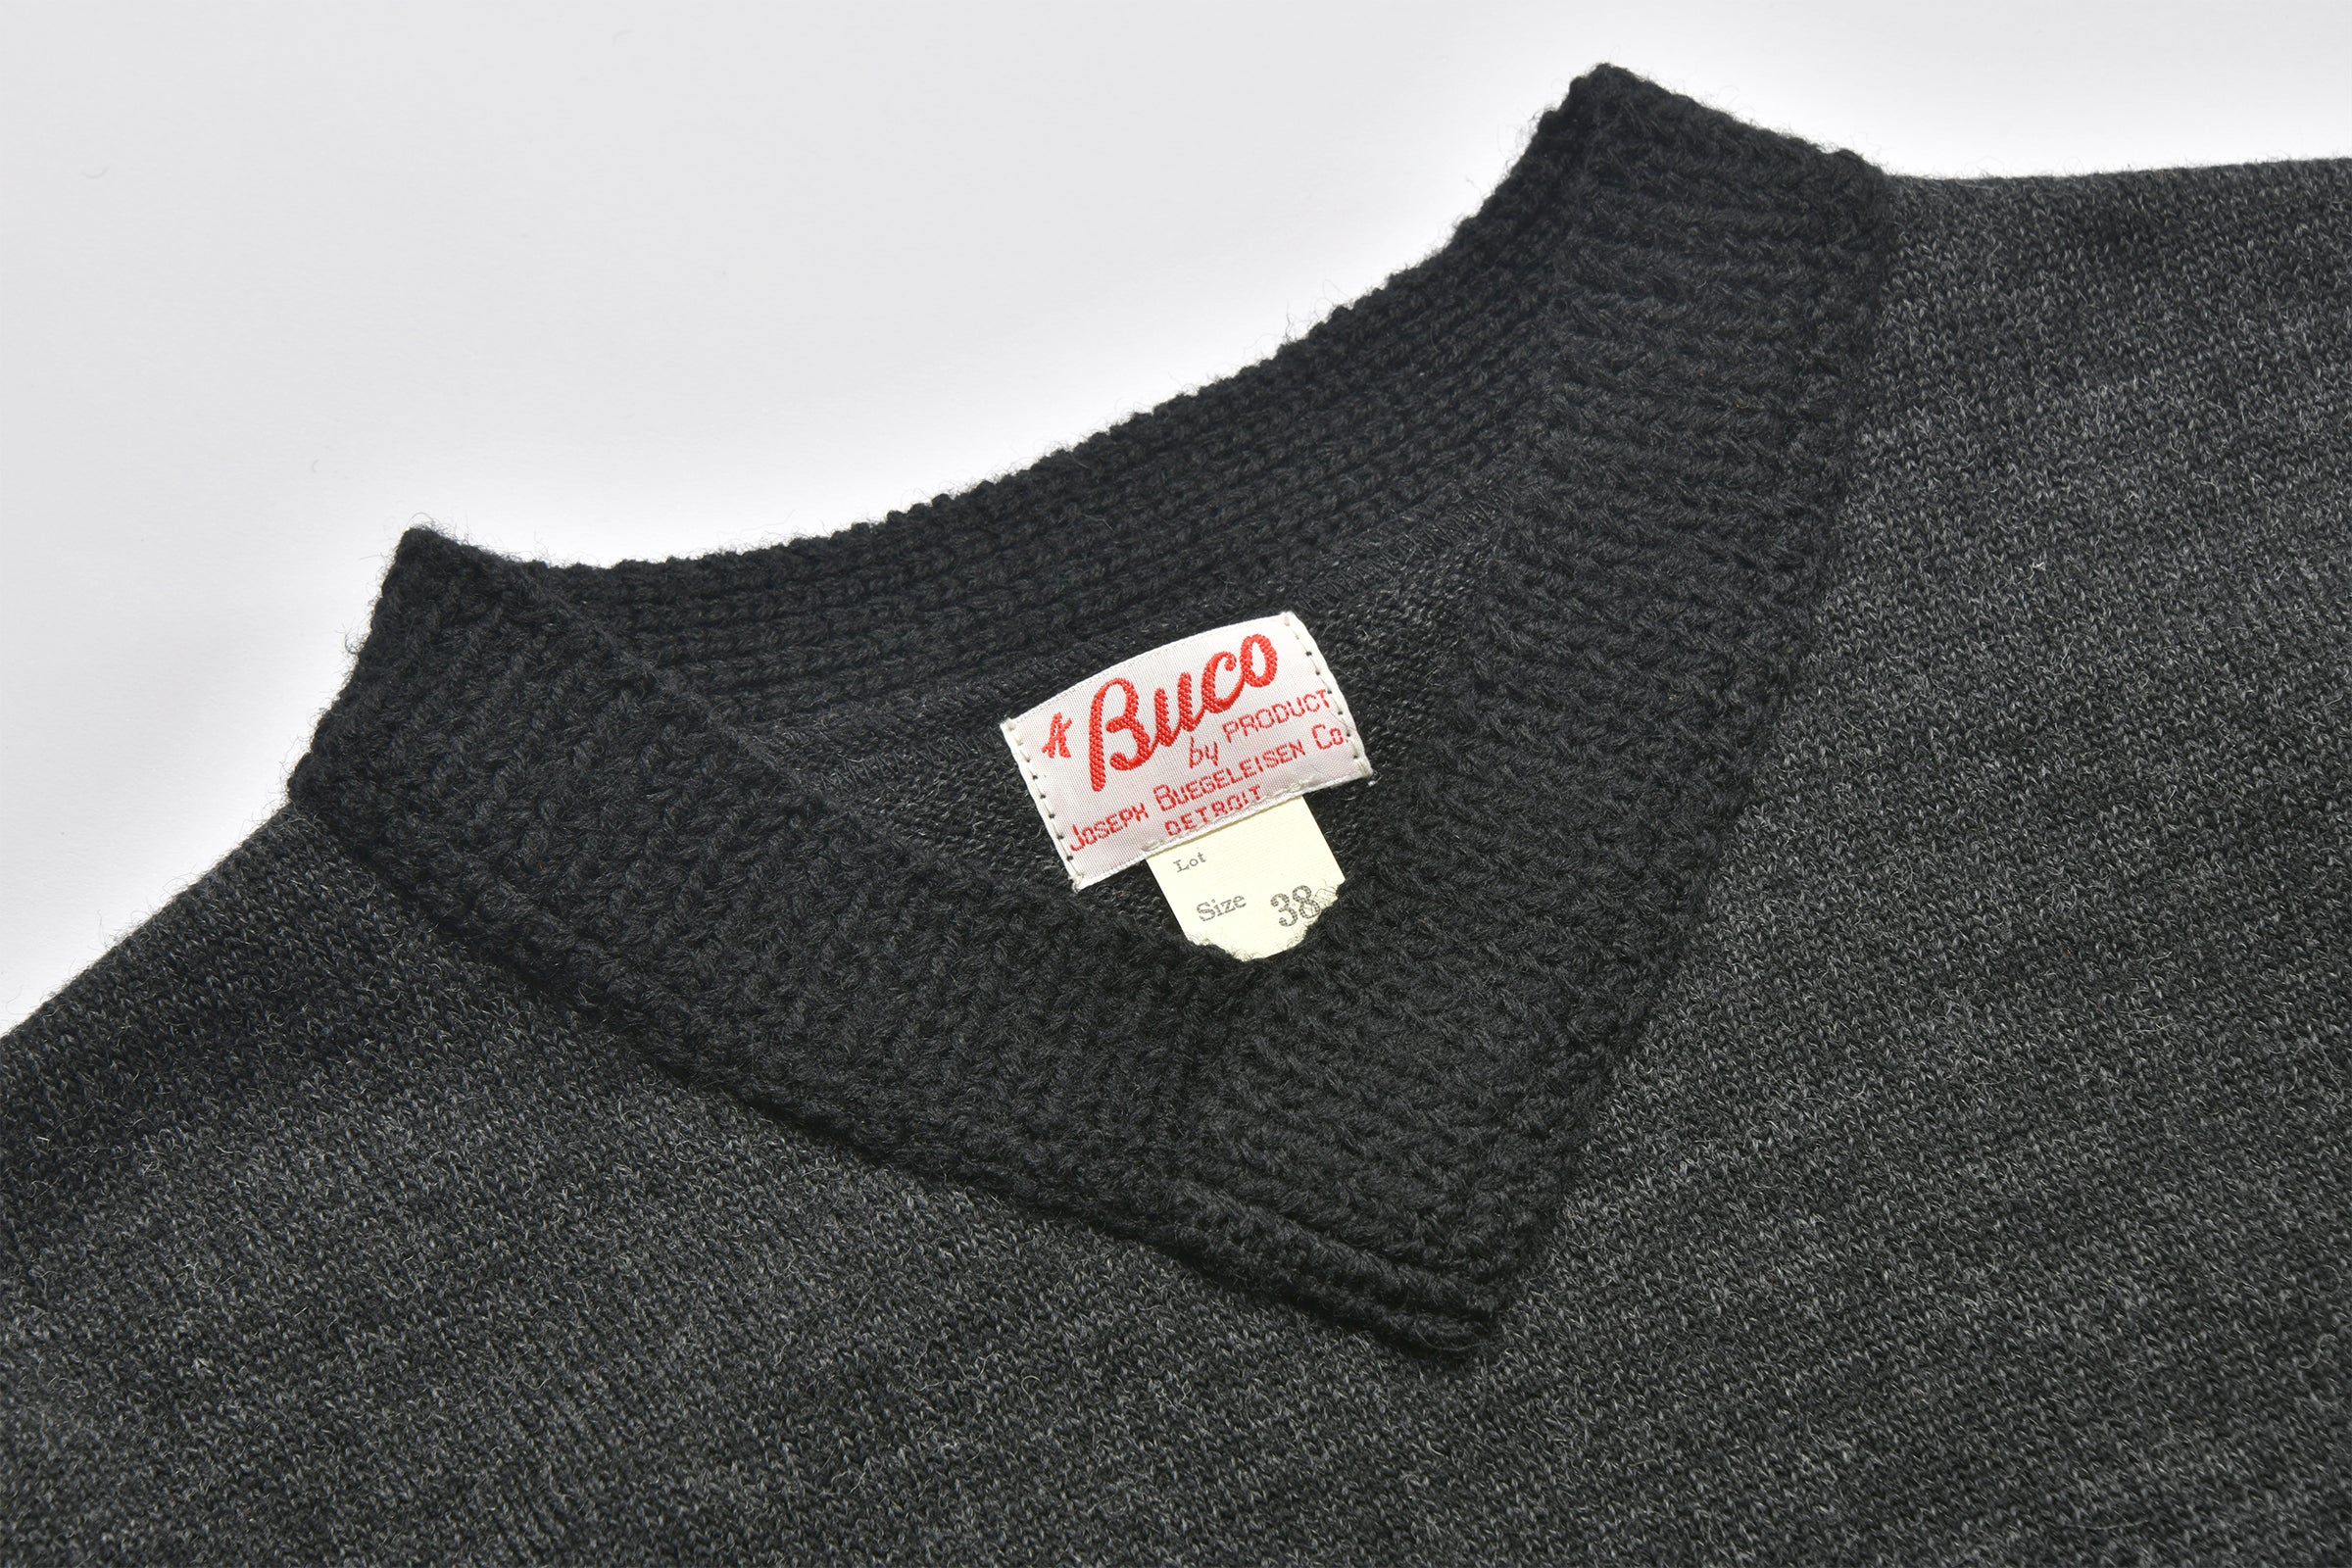 BUCO WOOL KNIT MOTORCYCLE JERSEY – The Real McCoy's